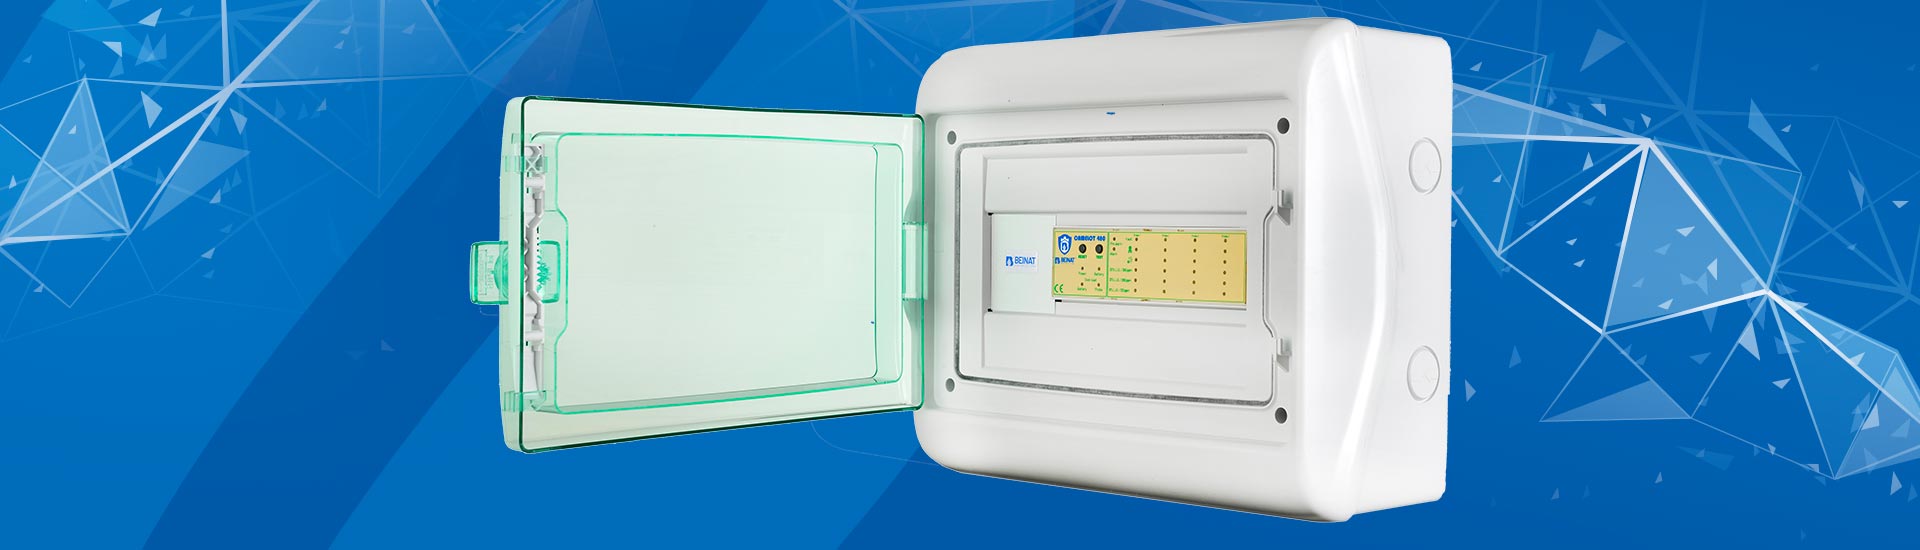 Gas safety: DIN rail mounting gas detection controllers available in box version